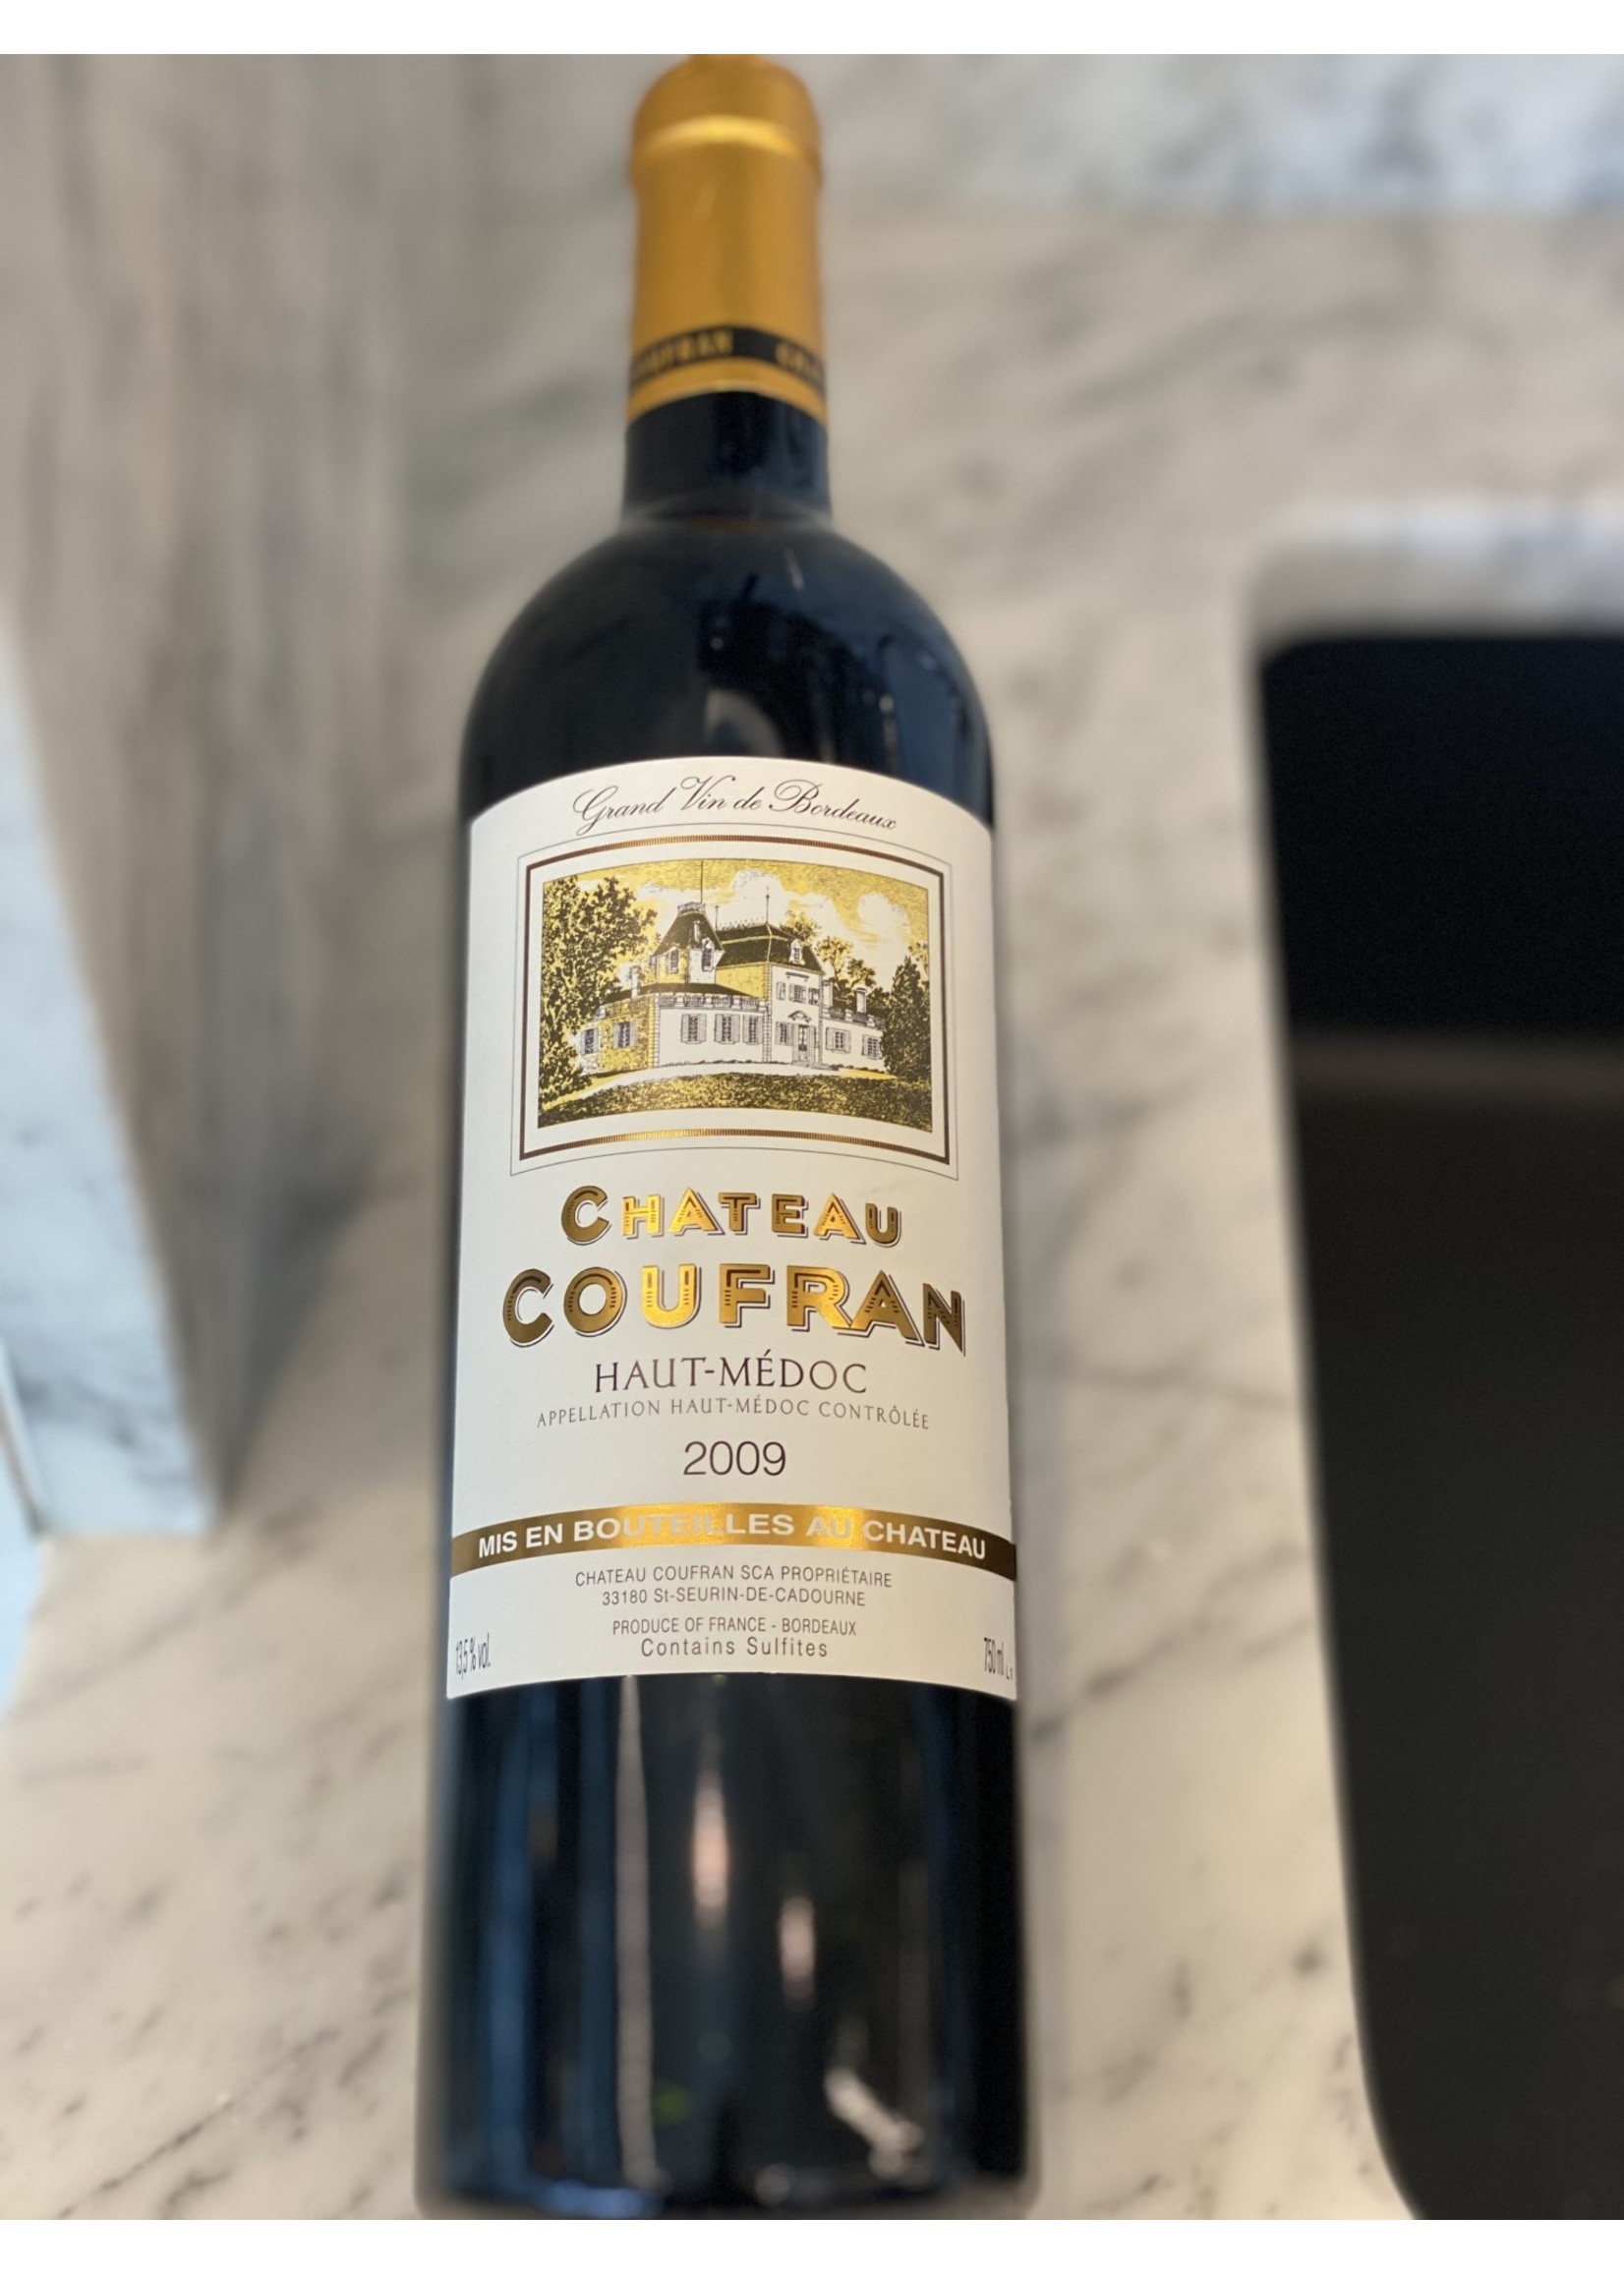 Chateau Coufran Chateau Coufran Haut-Medoc 09